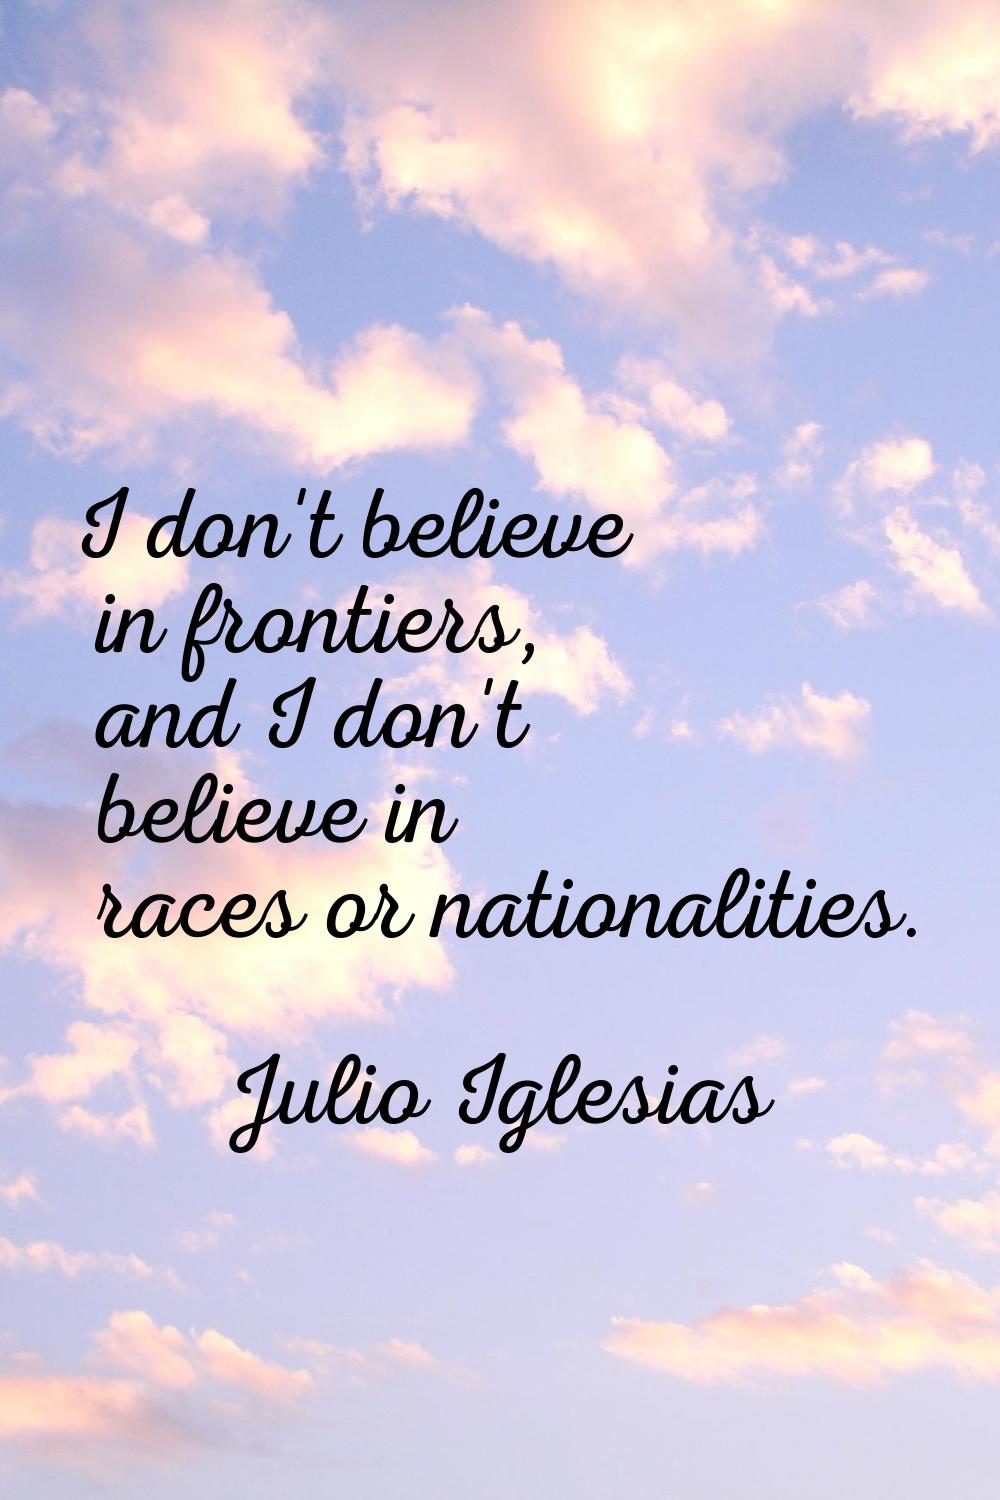 I don't believe in frontiers, and I don't believe in races or nationalities.